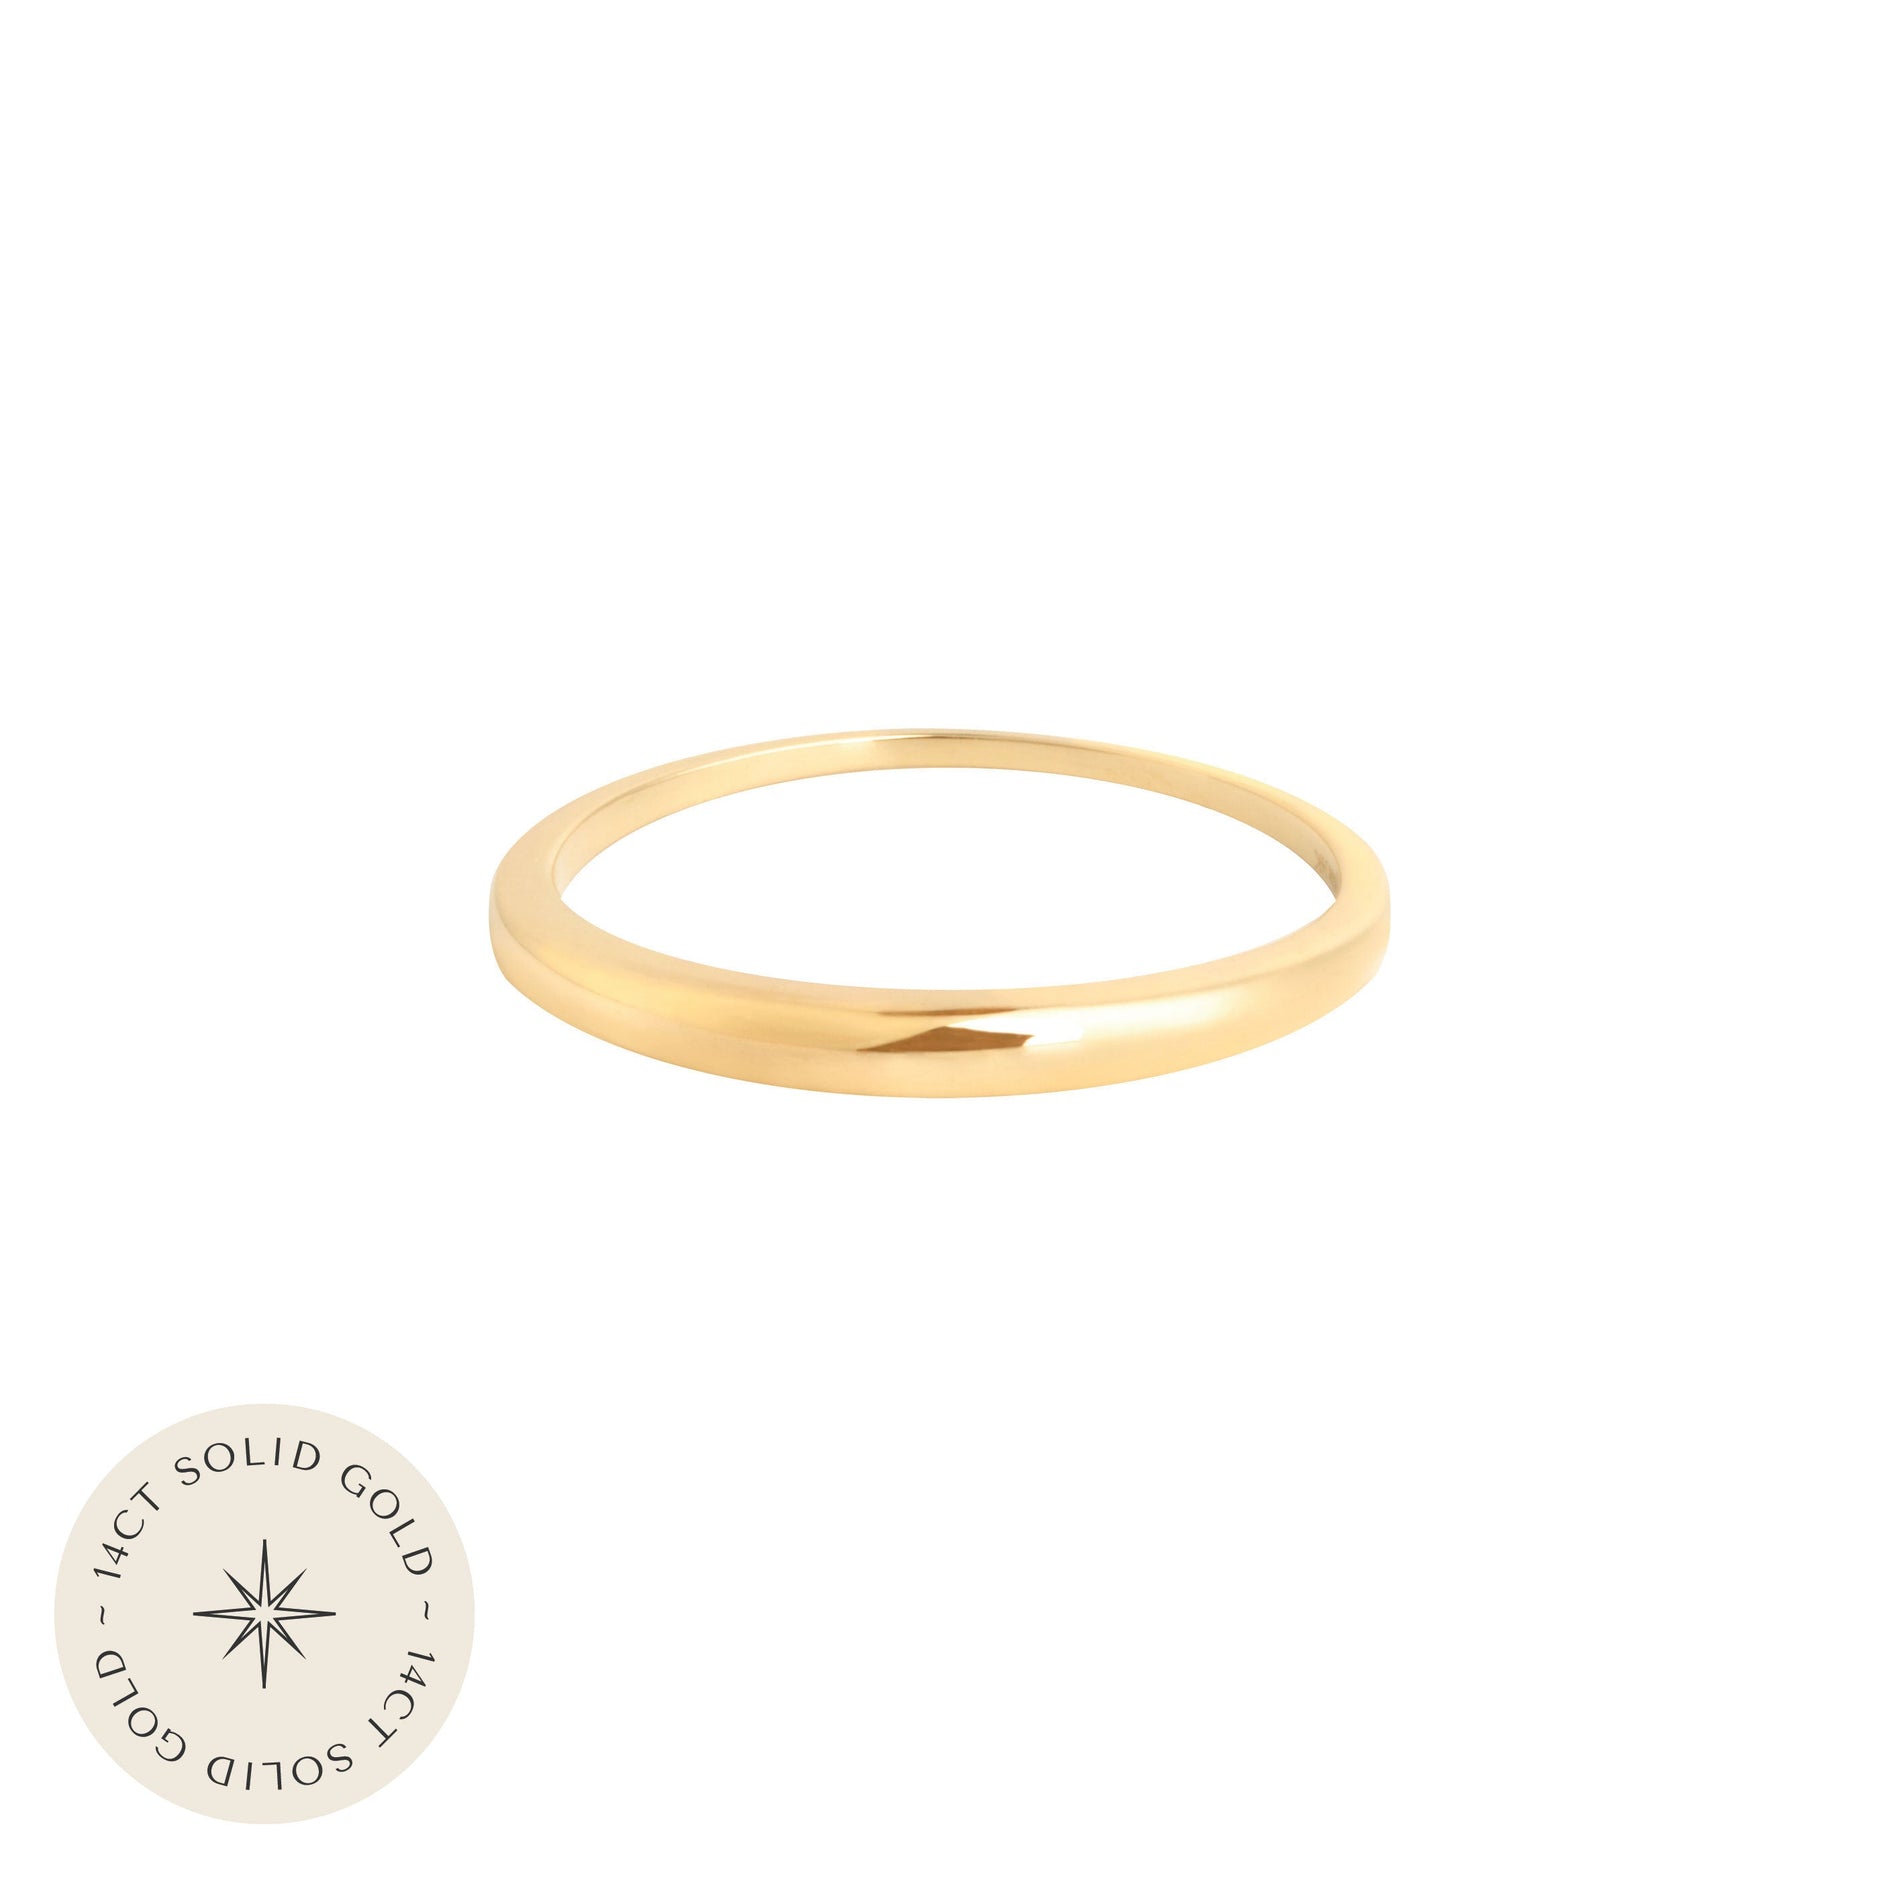 Dome Ring in Solid Gold with 14ct solid gold label